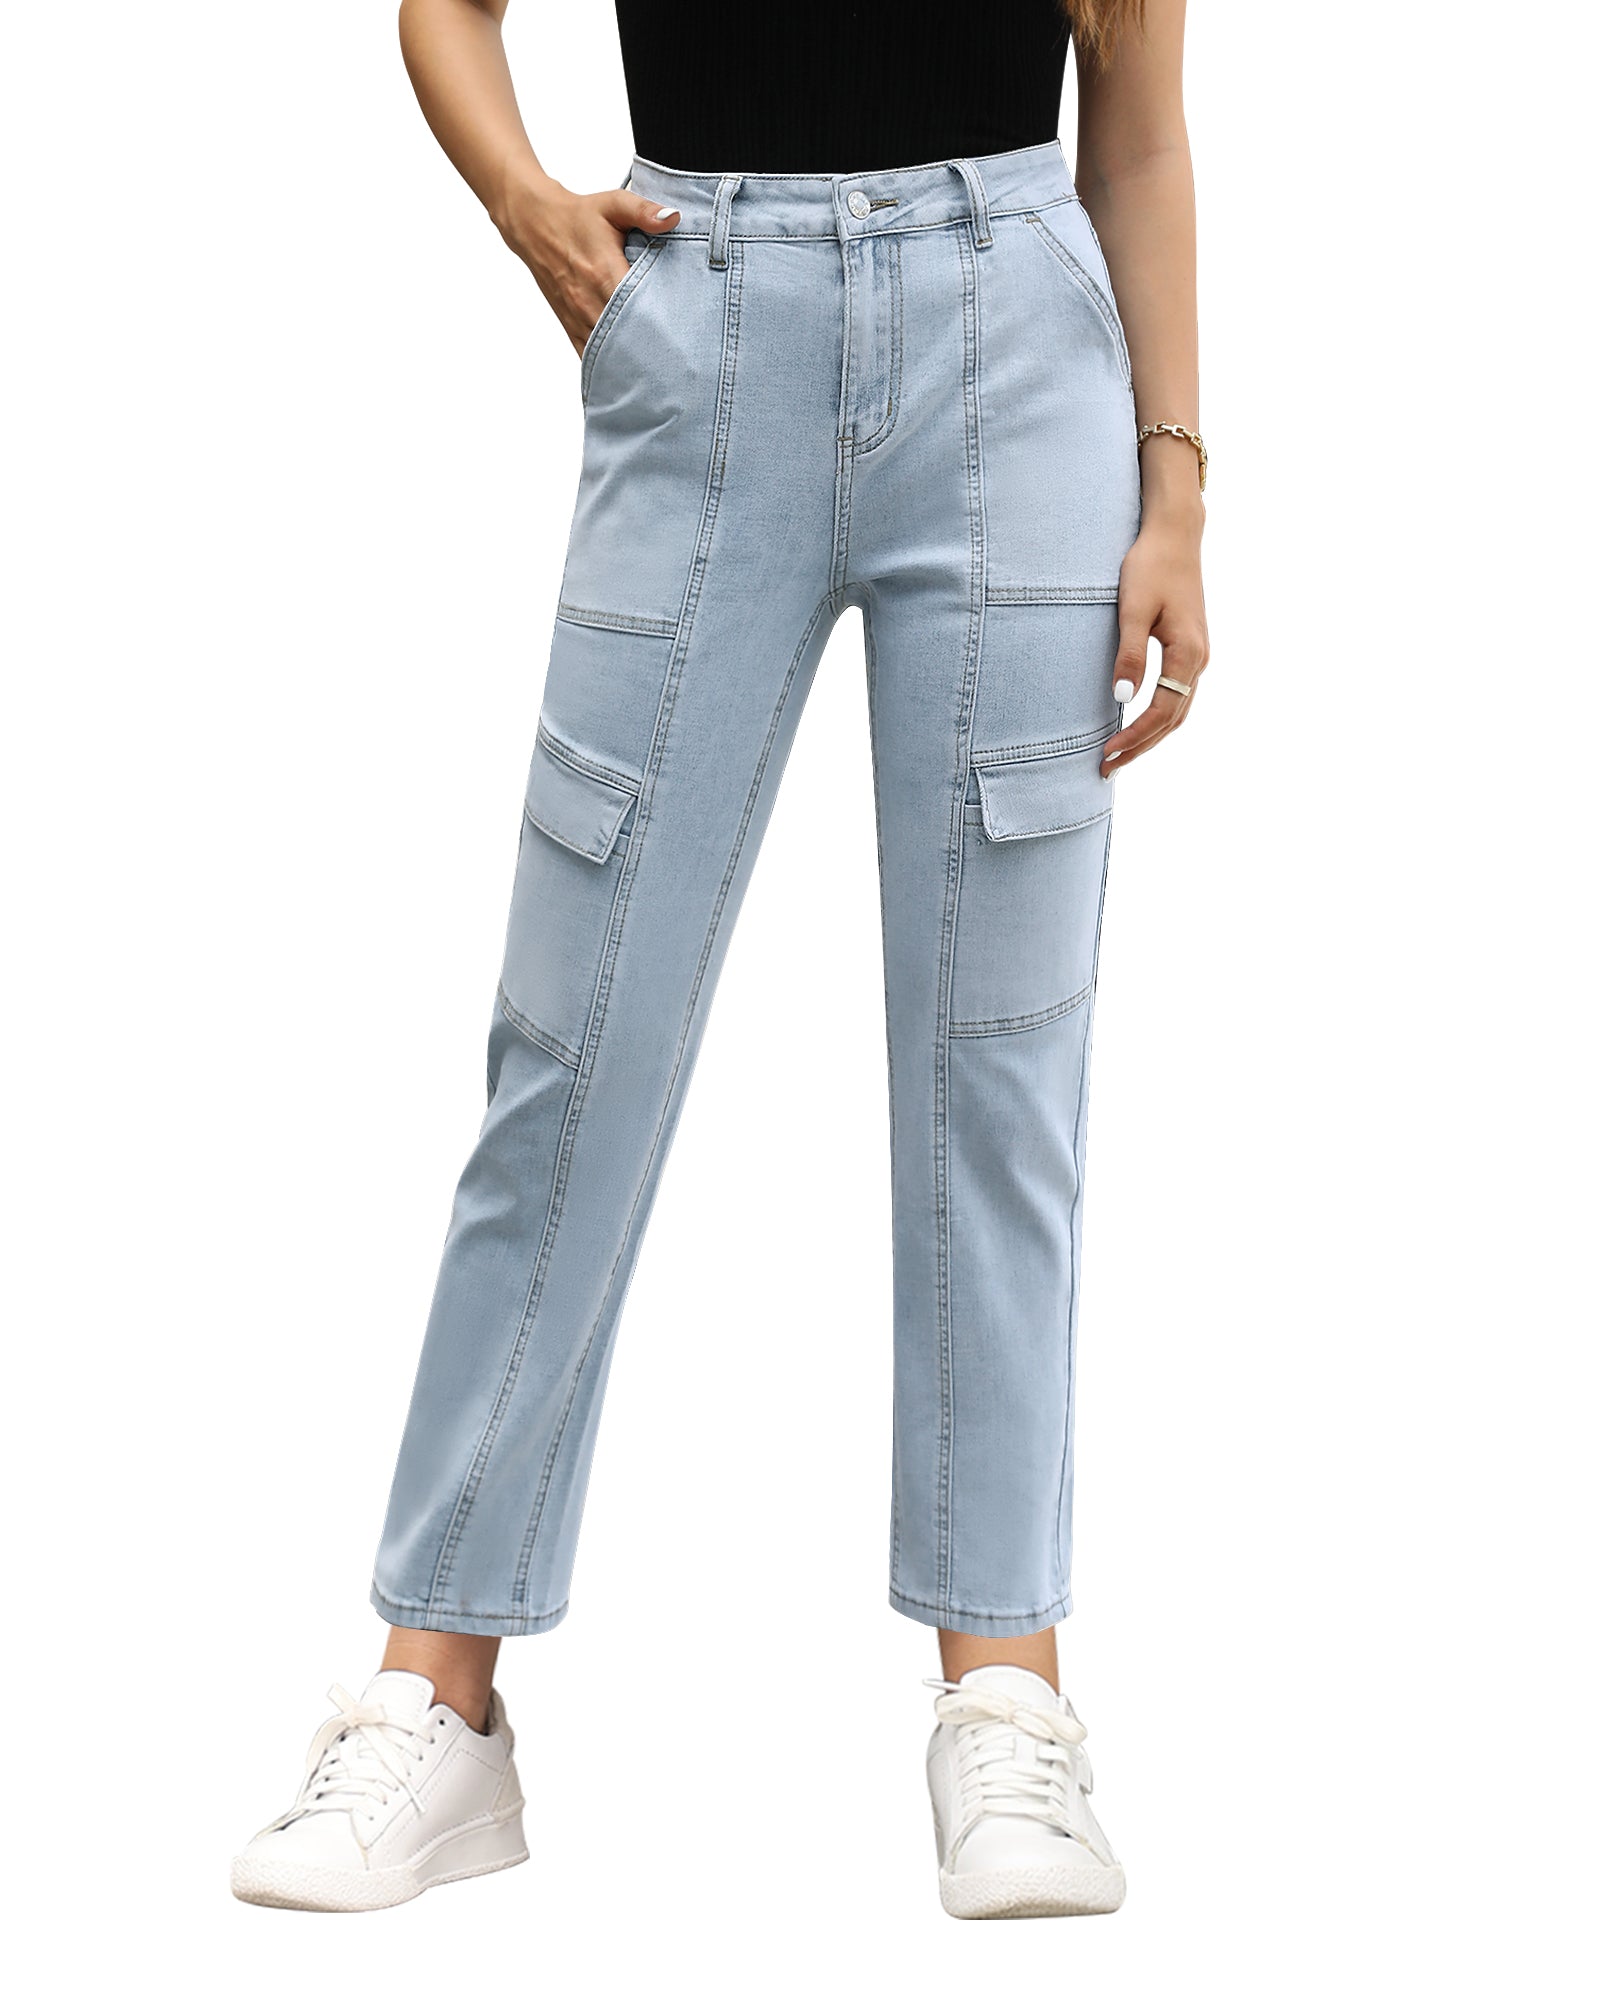  GRAPENT Jeans for Women Jeans Women Work Pants Womens Casual  Pants High Waisted Tummy Control Pants Work Pants Women Color Classic Blue  Size XS X-Small Size 0 Size 2 : Clothing